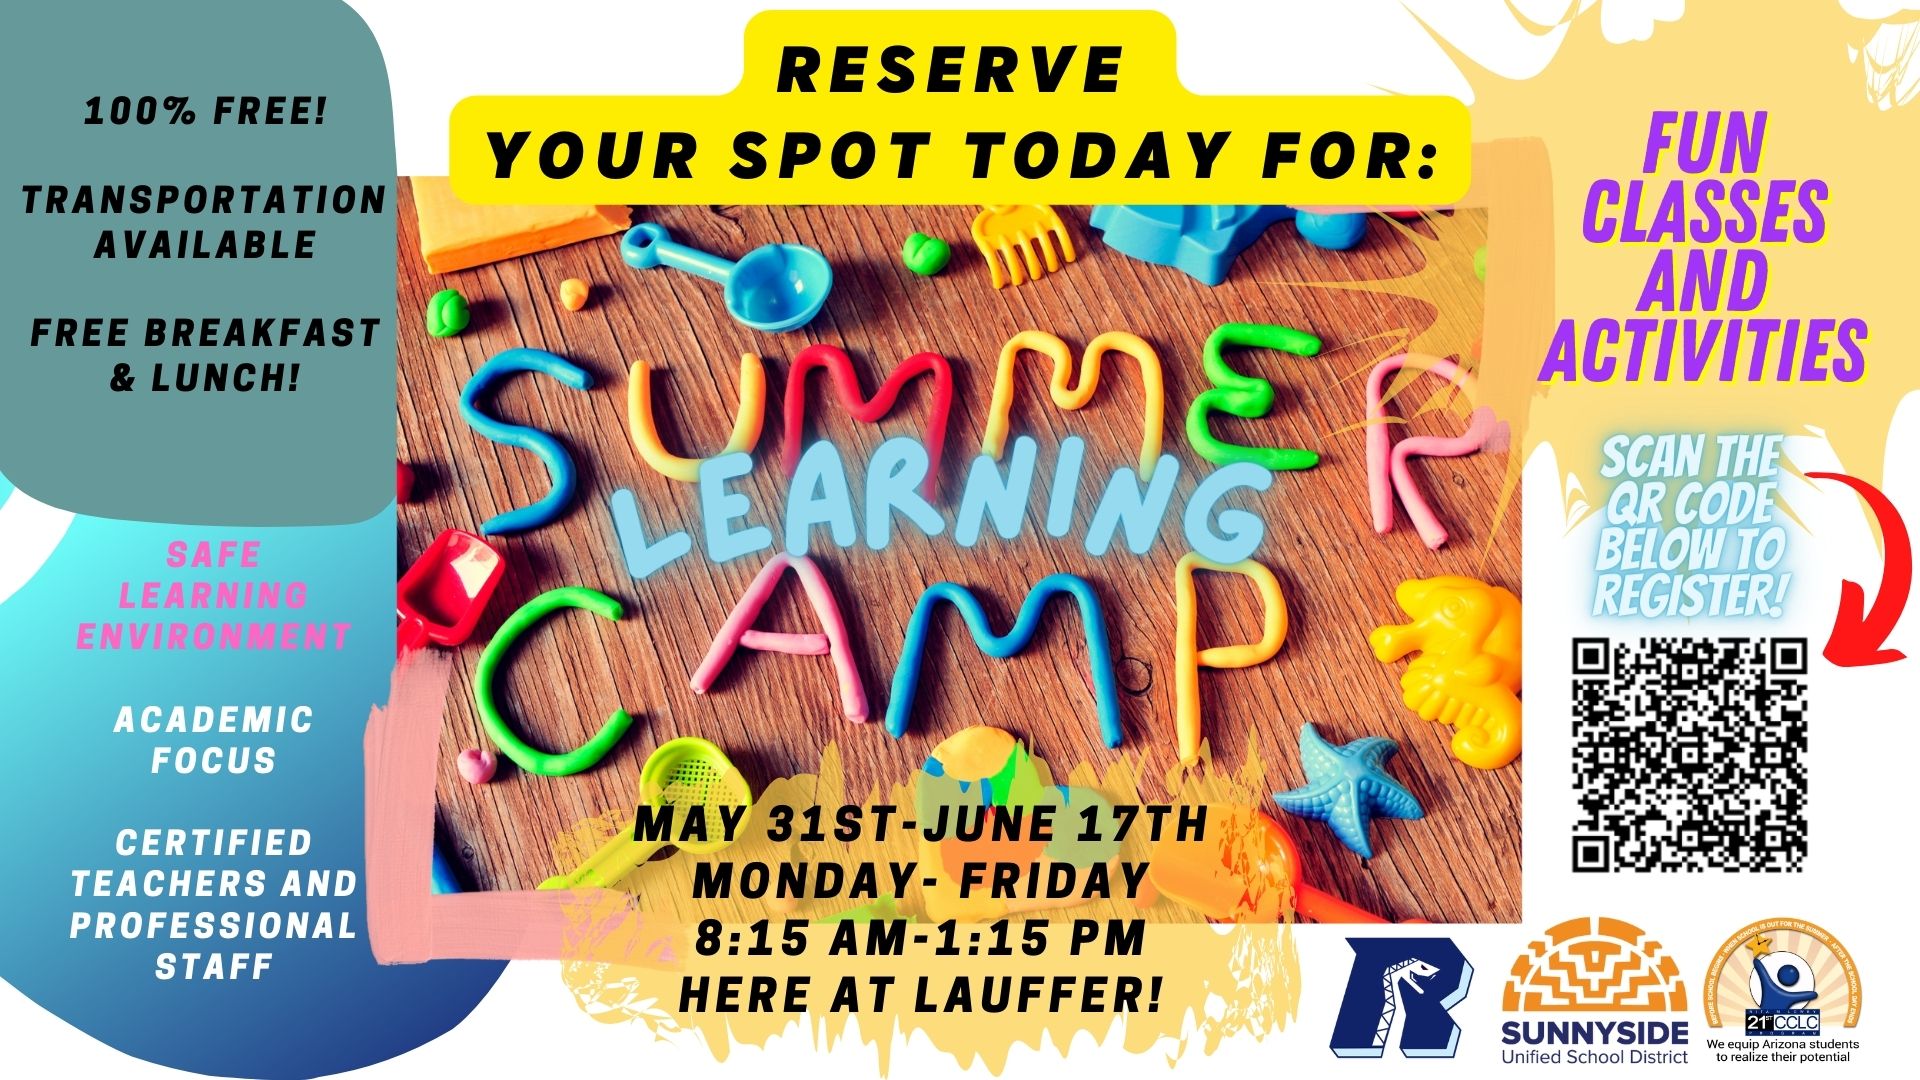 Summer Learning Camp